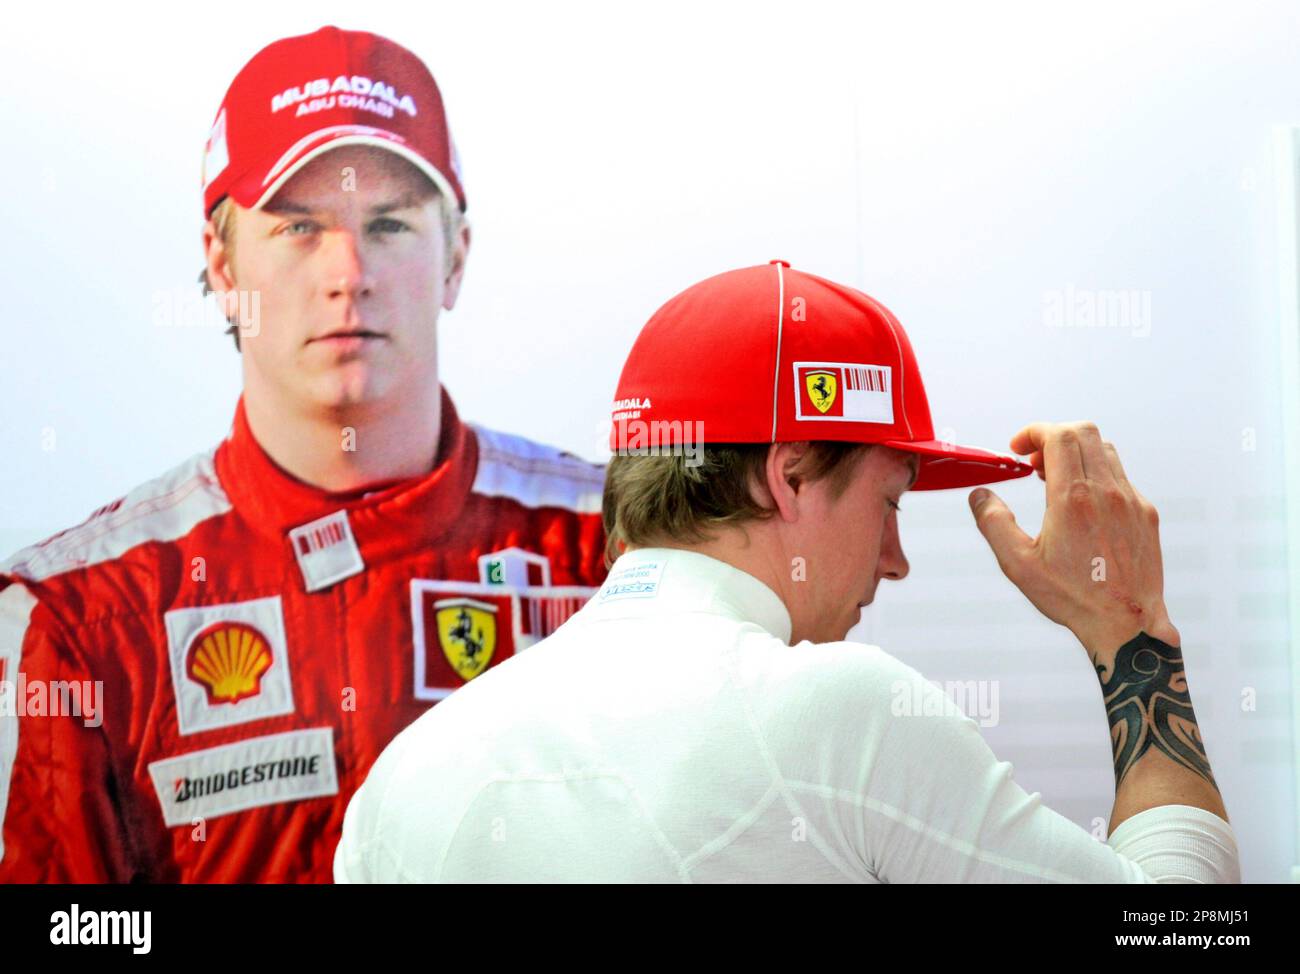 Ferrari Formula One driver Kimi Raikkonen of Finland puts his cap on at his  team garage during the first practice session in Sepang racetrack, outside  Kuala Lumpur, Malaysia, Friday, April 3, 2009.